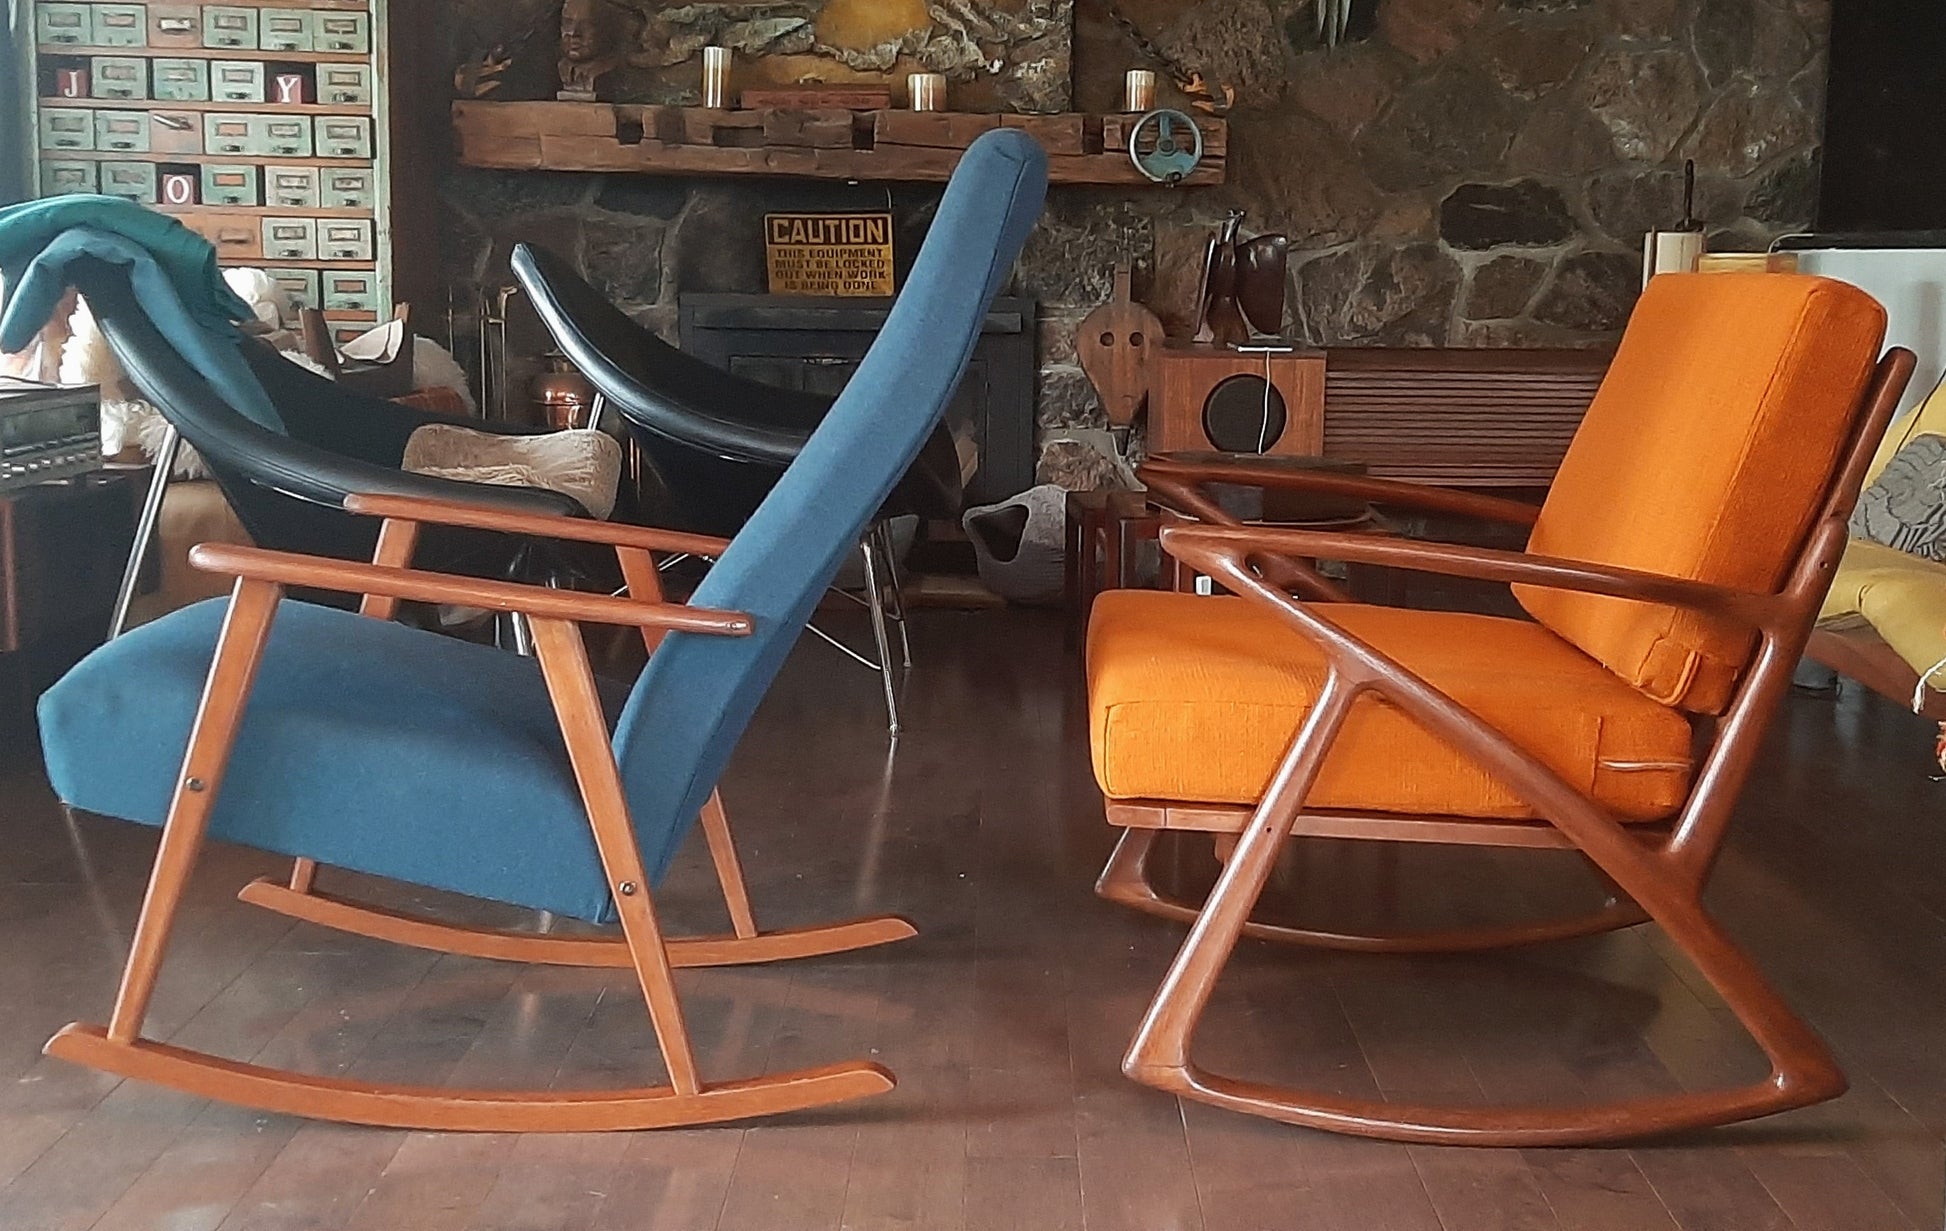 Danish-style Lounge Chair from Italy w/ New Cushions - Mid-century